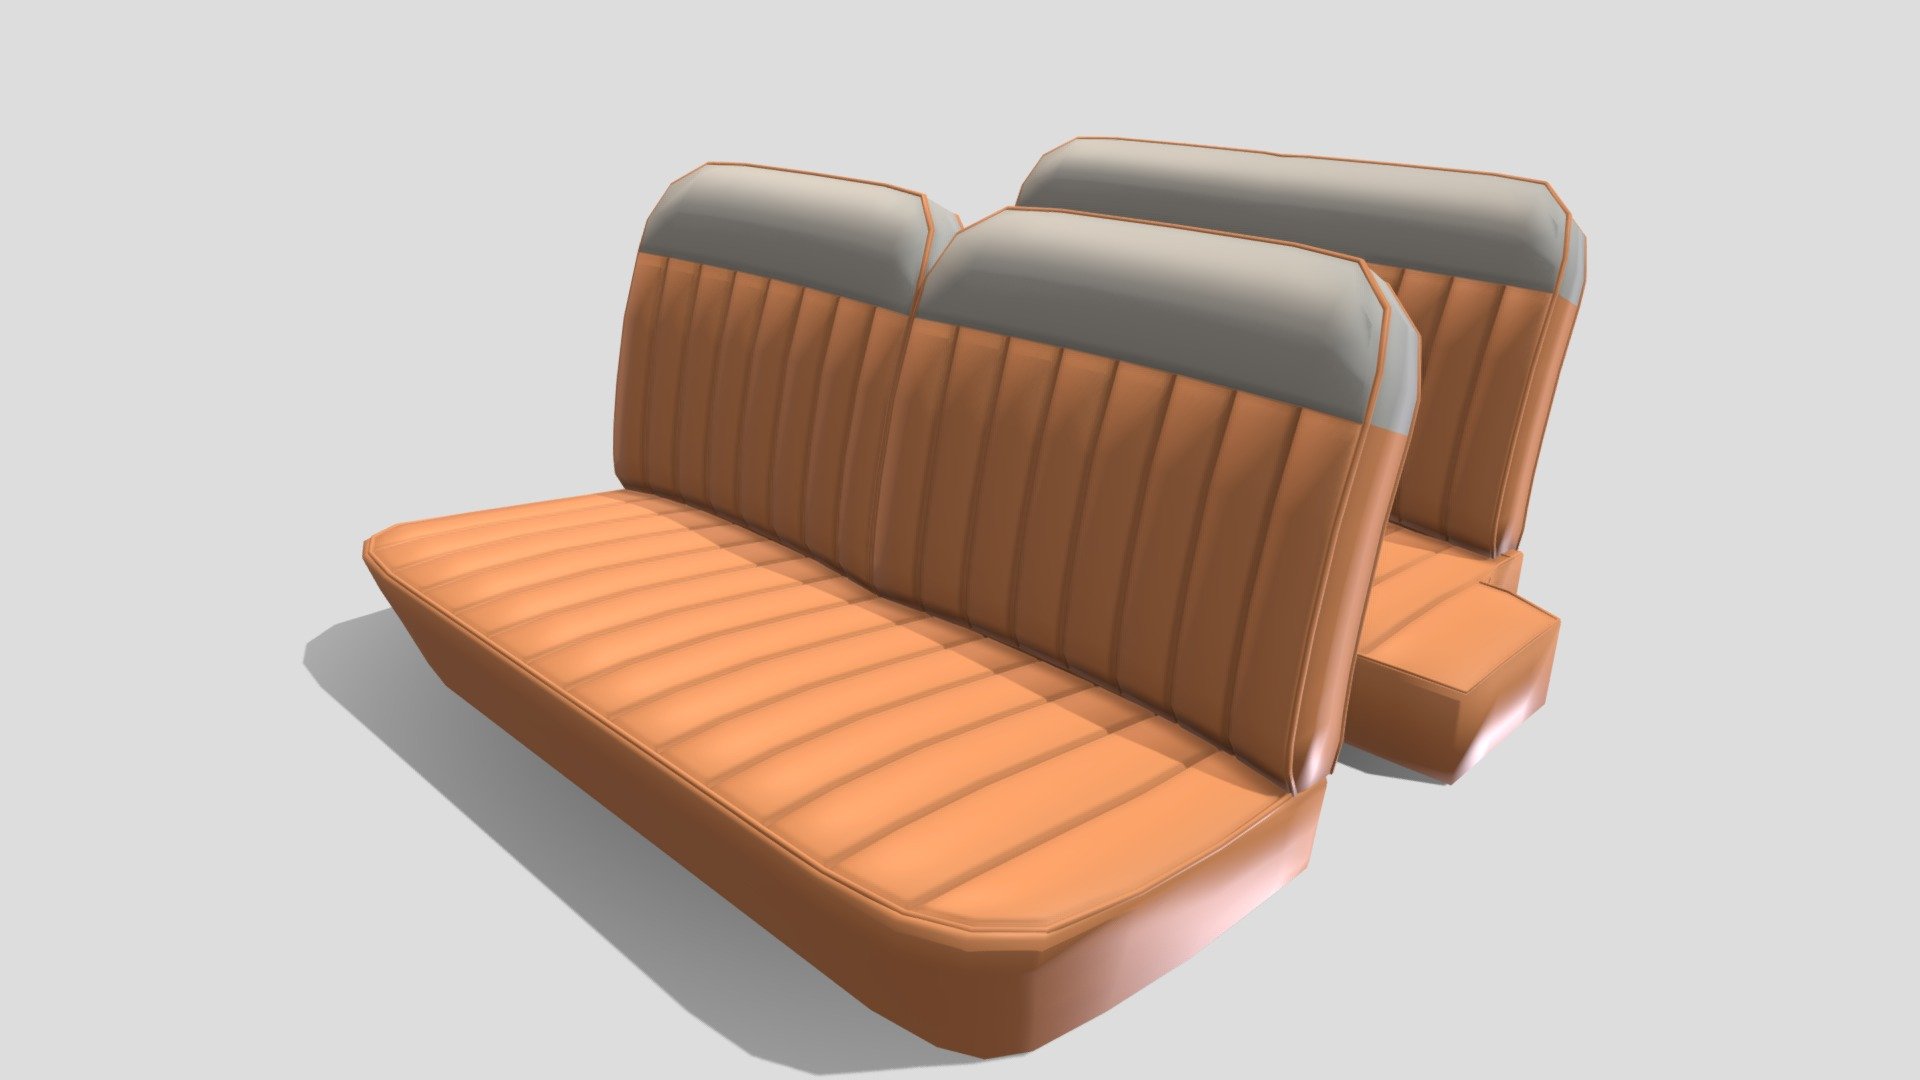 Generic 60s Car Seats 3d model rendered with Cycles in Blender, as per seen on attached images. 
The 3d model is scaled to original size in Blender.

File formats:
-.blend, rendered with cycles, as seen in the images;
-.obj, with materials applied;
-.dae, with materials applied;
-.fbx, with materials applied;
-.stl;

3D Software:
The 3D model was originally created in Blender 2.8 and rendered with Cycles.

Materials and textures:
The models have materials applied in all formats, and are ready to import and render.

Preview scenes:
The preview images are rendered in Blender using its built-in render engine &lsquo;Cycles'.
Note that the blend files come directly with the rendering scene included and the render command will generate the exact result as seen in previews.
Scene elements are on a different layer from the actual model for easier manipulation of objects.

General:
The models are built mostly out of quads and are subdivisable.
It comes in separate parts, named correctly for the sake of convenience 3d model